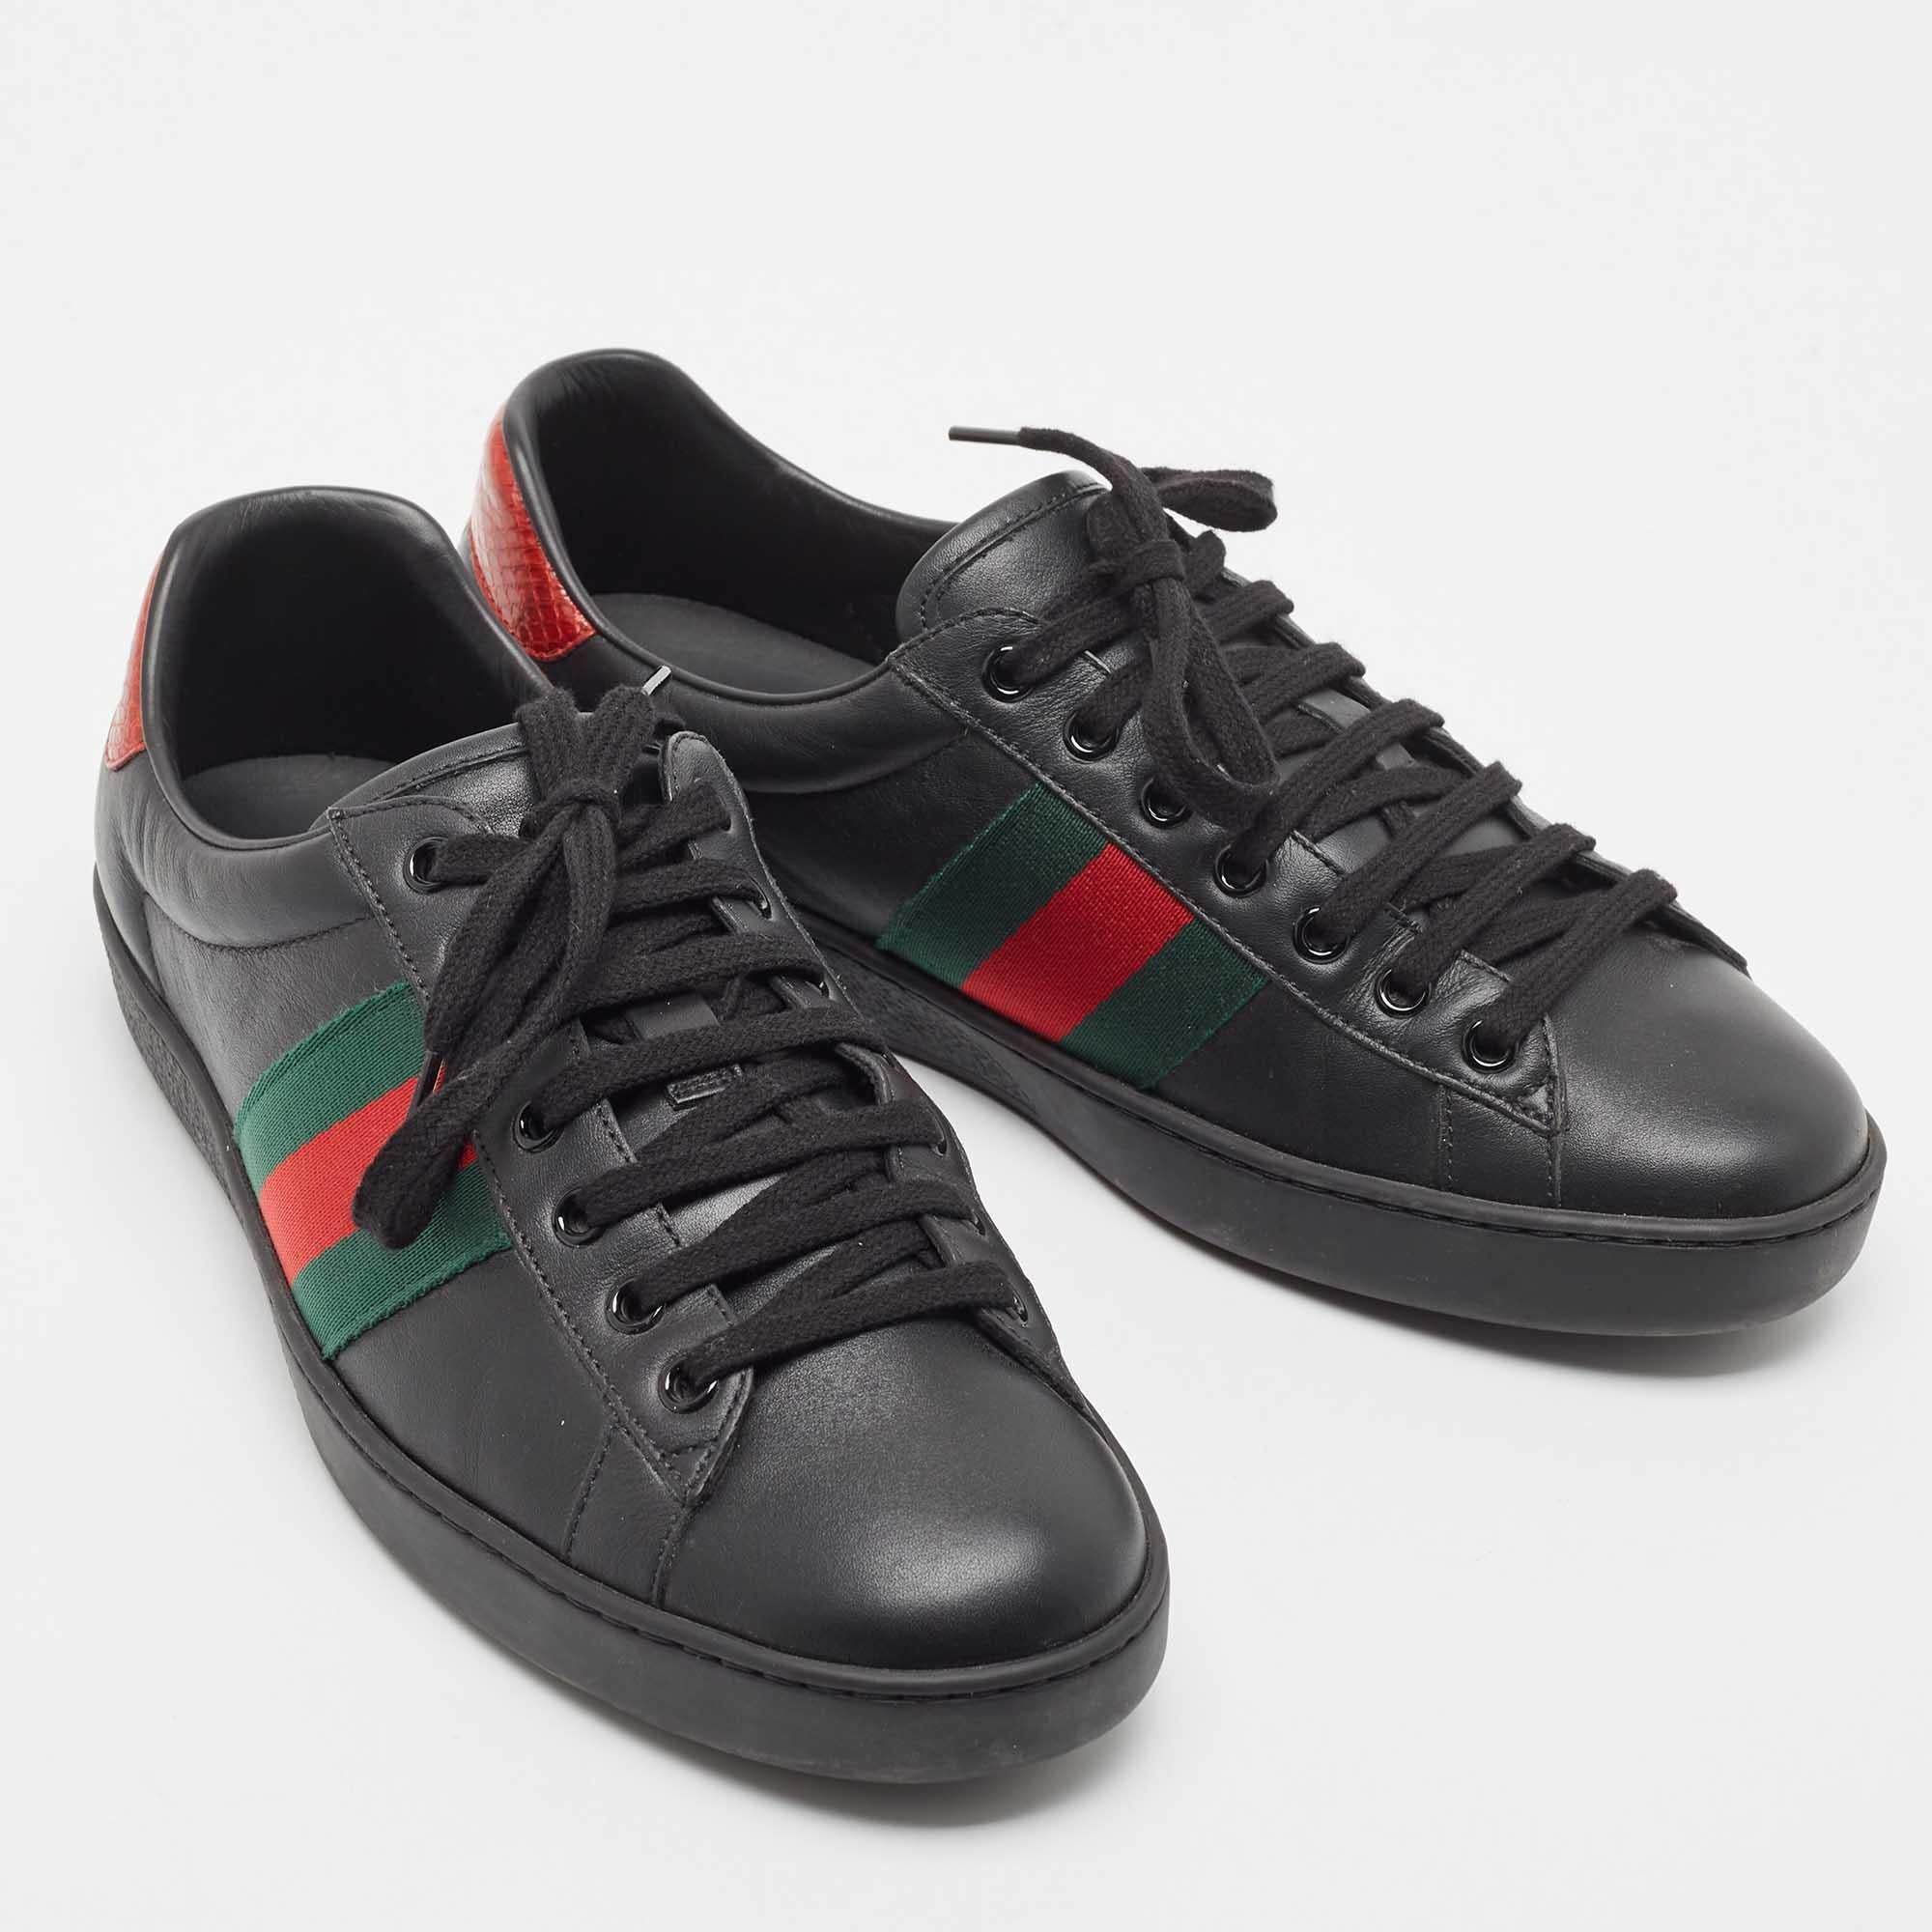 Gucci Black Leather Ace Web Low Top Sneakers Size 41.5 5